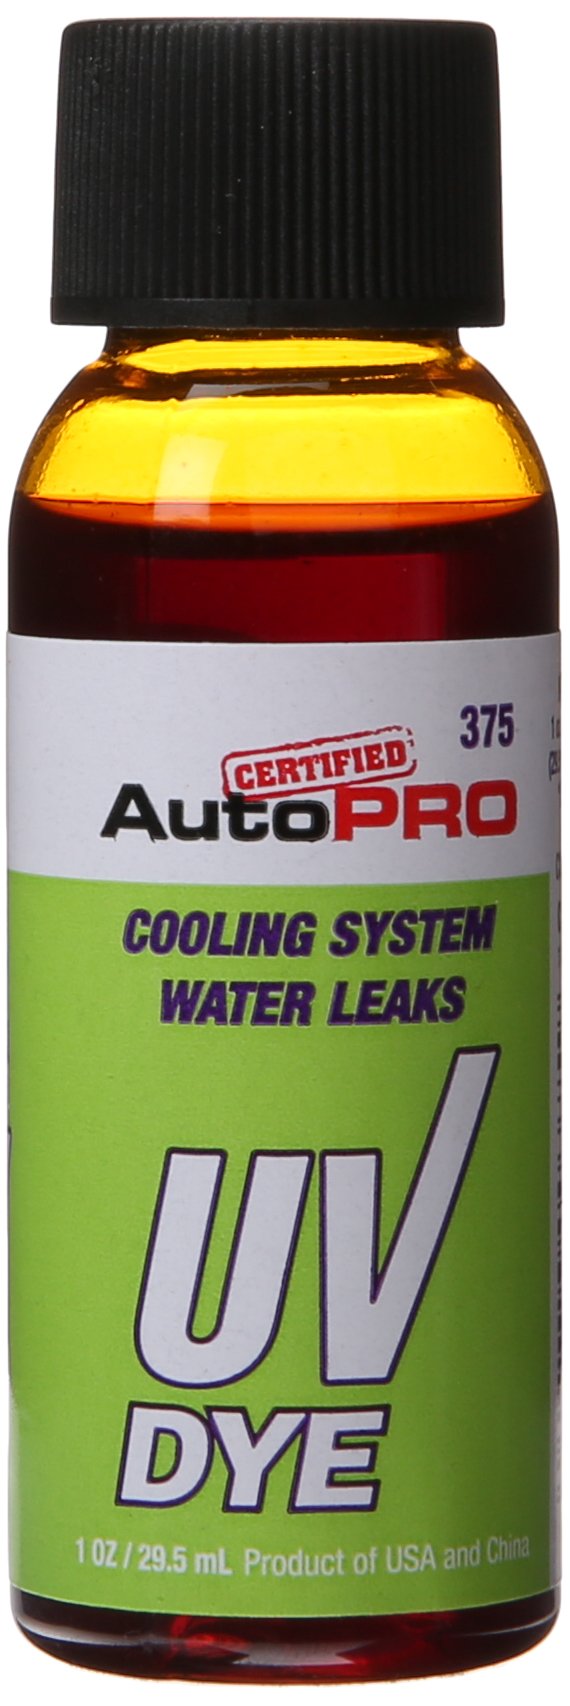 Book Cover InterDynamics Certified A/C Pro Car Air Conditioner Leak Detector Dye, Leak Detection UV Dye for Cars and Radiators, 1 Oz Universal Engine Cooling Systems UV Dye